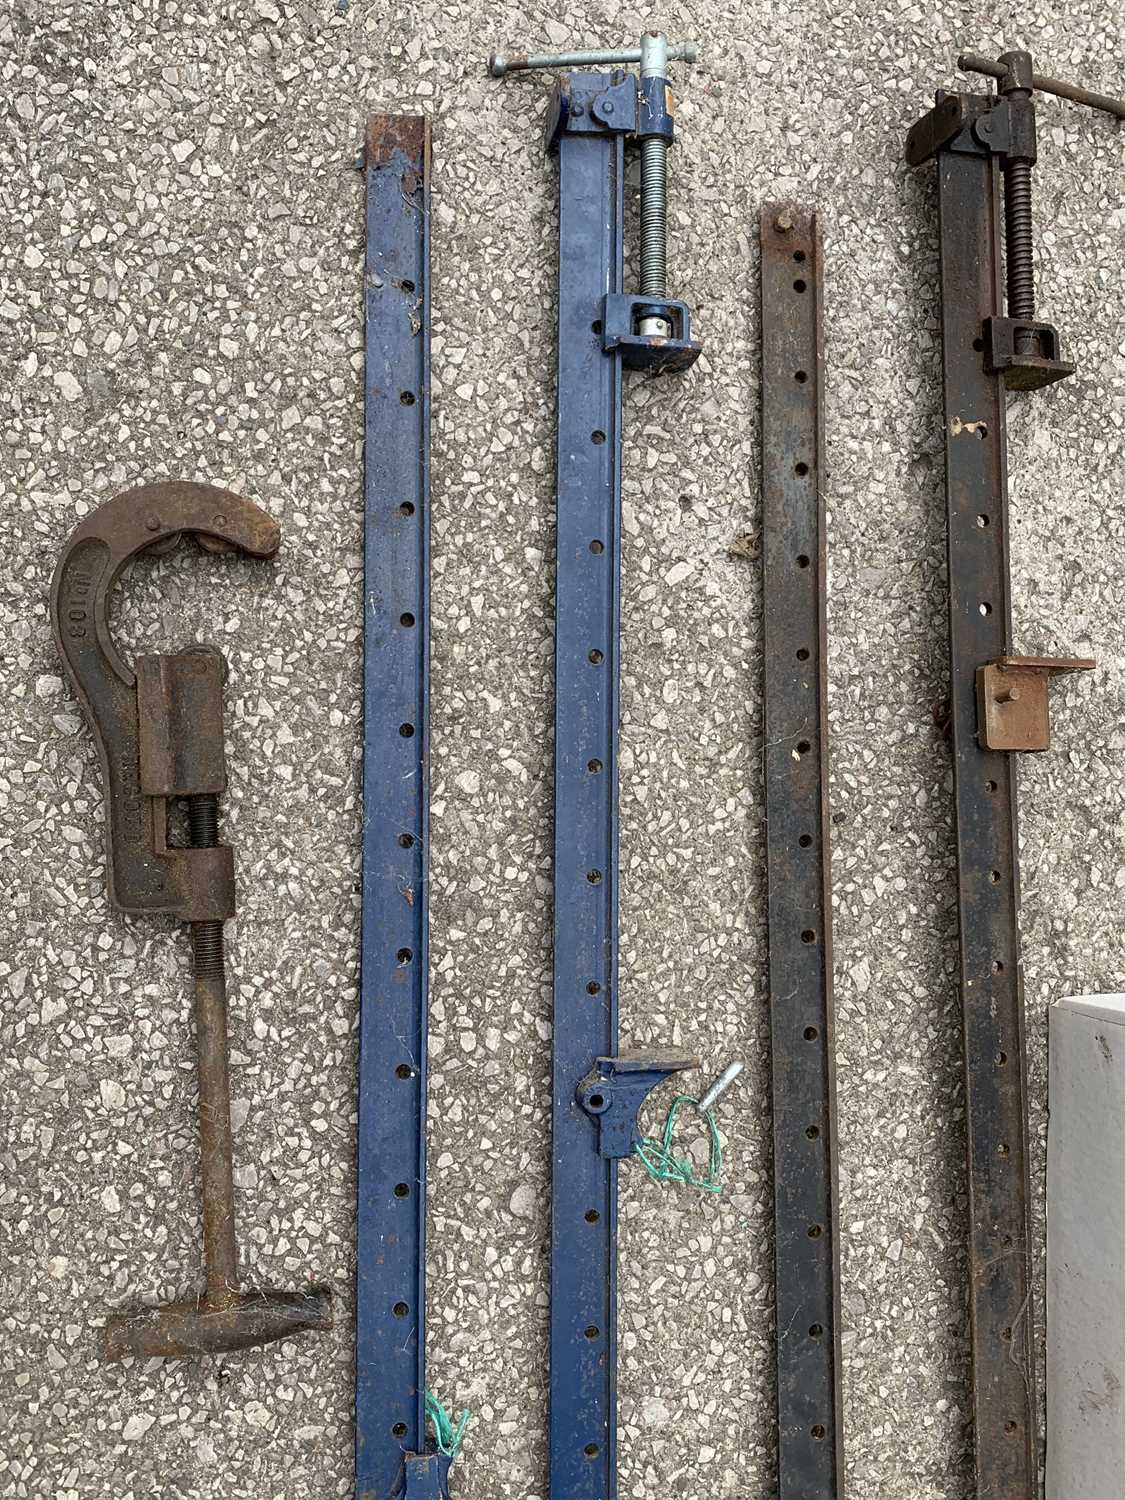 WORKSHOP TOOLS to include sash clamps, no. 3 vice, Record no. 103 pipe cutter, AL-KO towing ball and - Image 4 of 6